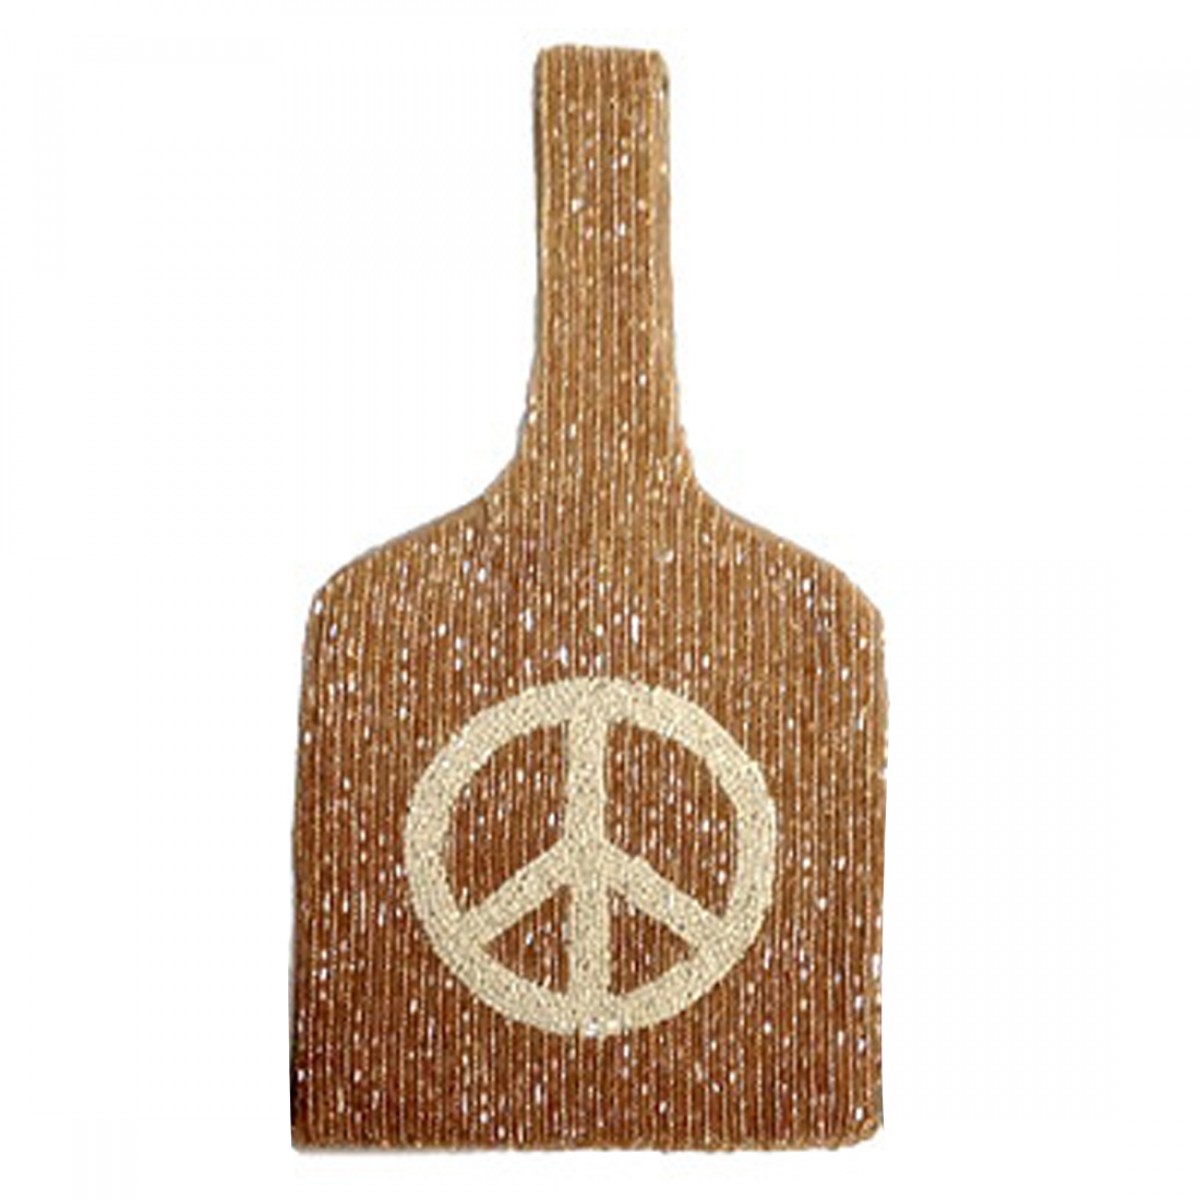 Wristlet with Peace Sign Motif